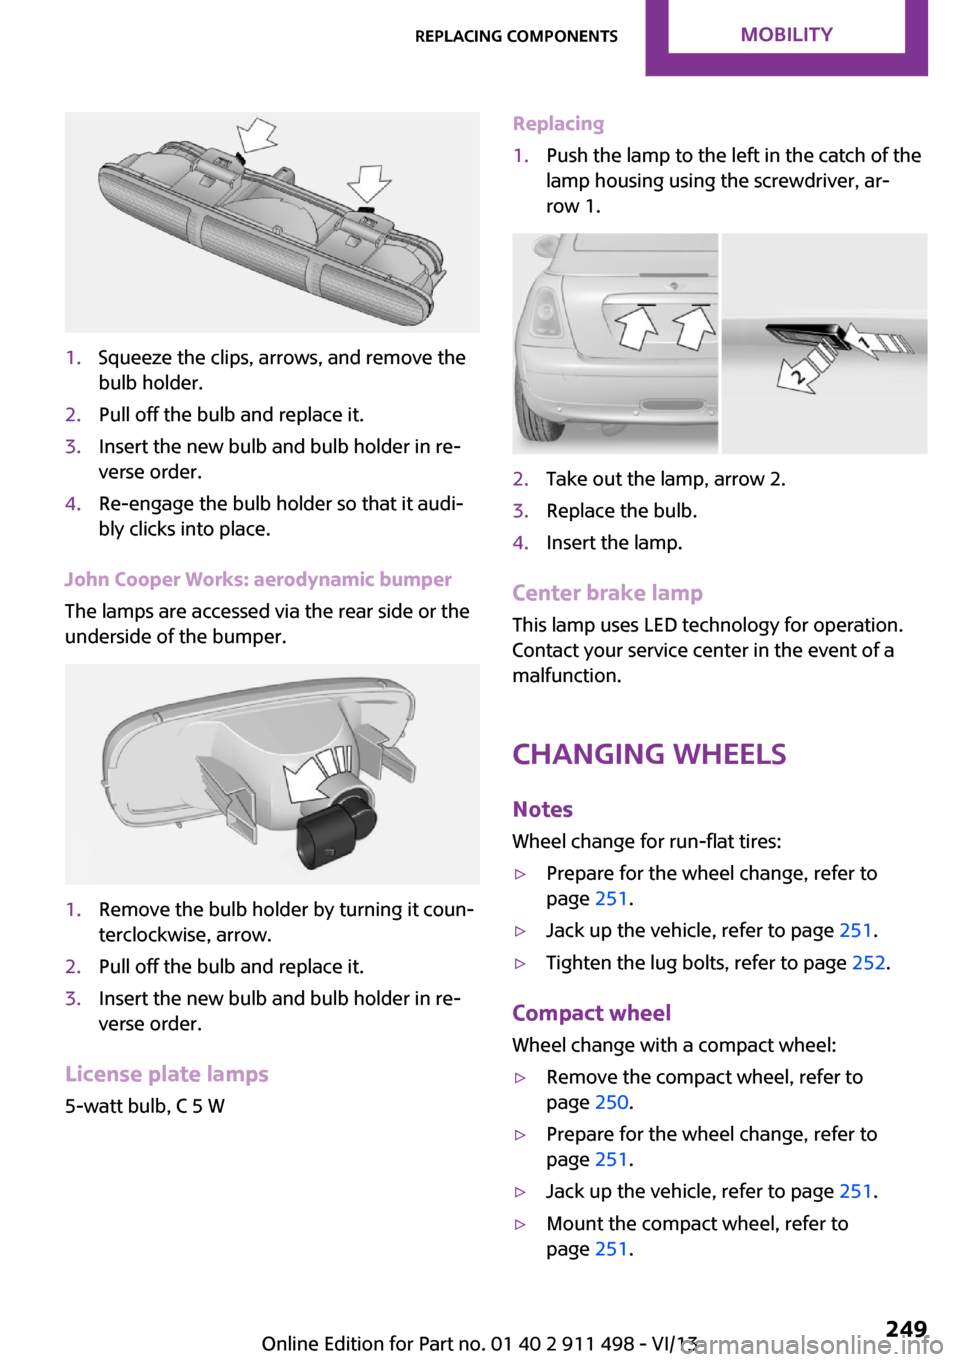 MINI Roadster 2014  Owners Manual (Mini Connected) 1.Squeeze the clips, arrows, and remove the
bulb holder.2.Pull off the bulb and replace it.3.Insert the new bulb and bulb holder in re‐
verse order.4.Re-engage the bulb holder so that it audi‐
bly